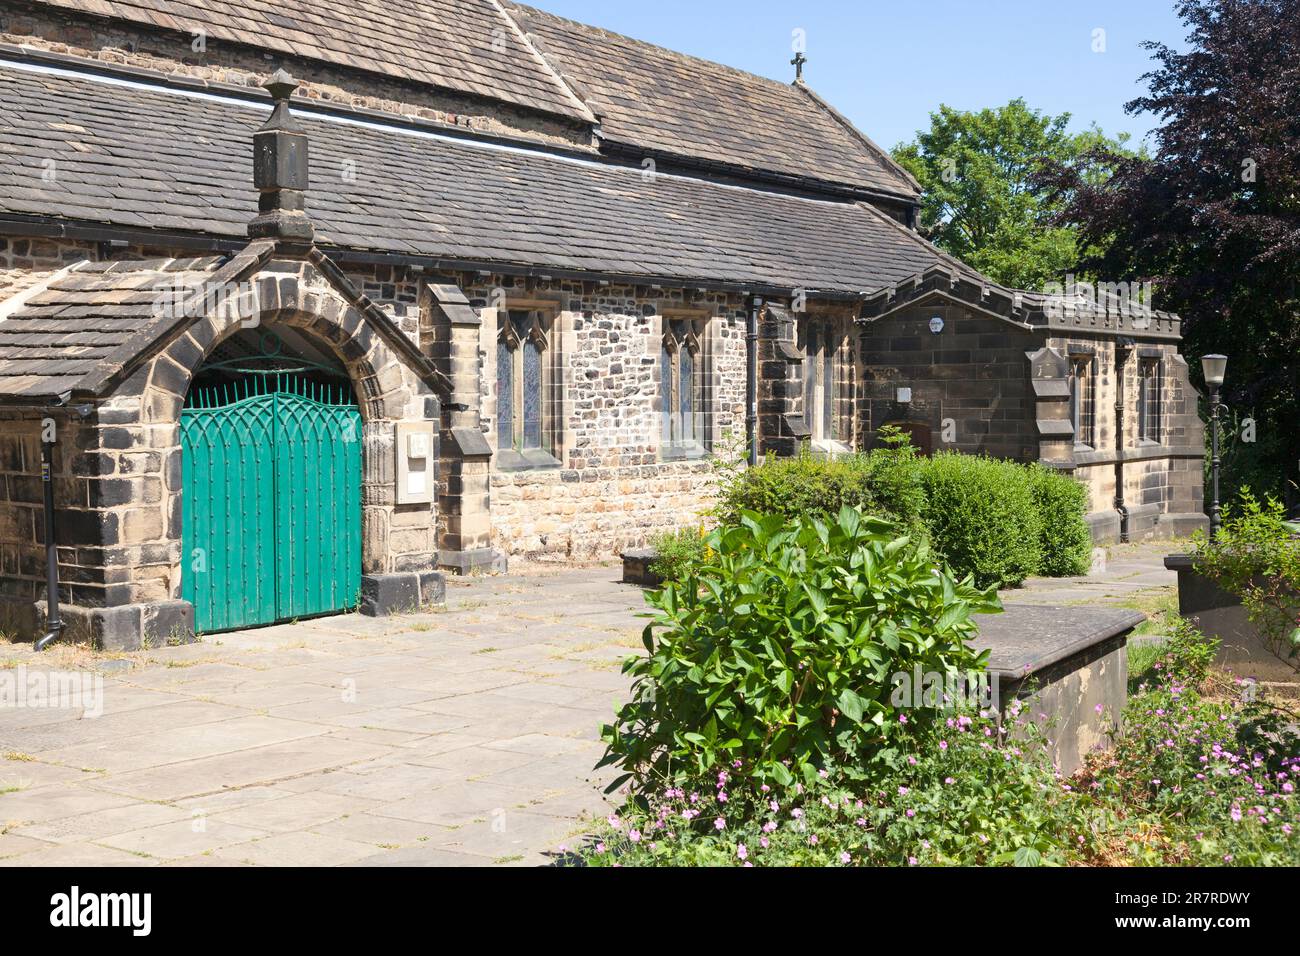 Church of St Mary the Virgin, Elland, West Yorkshire Stock Photo